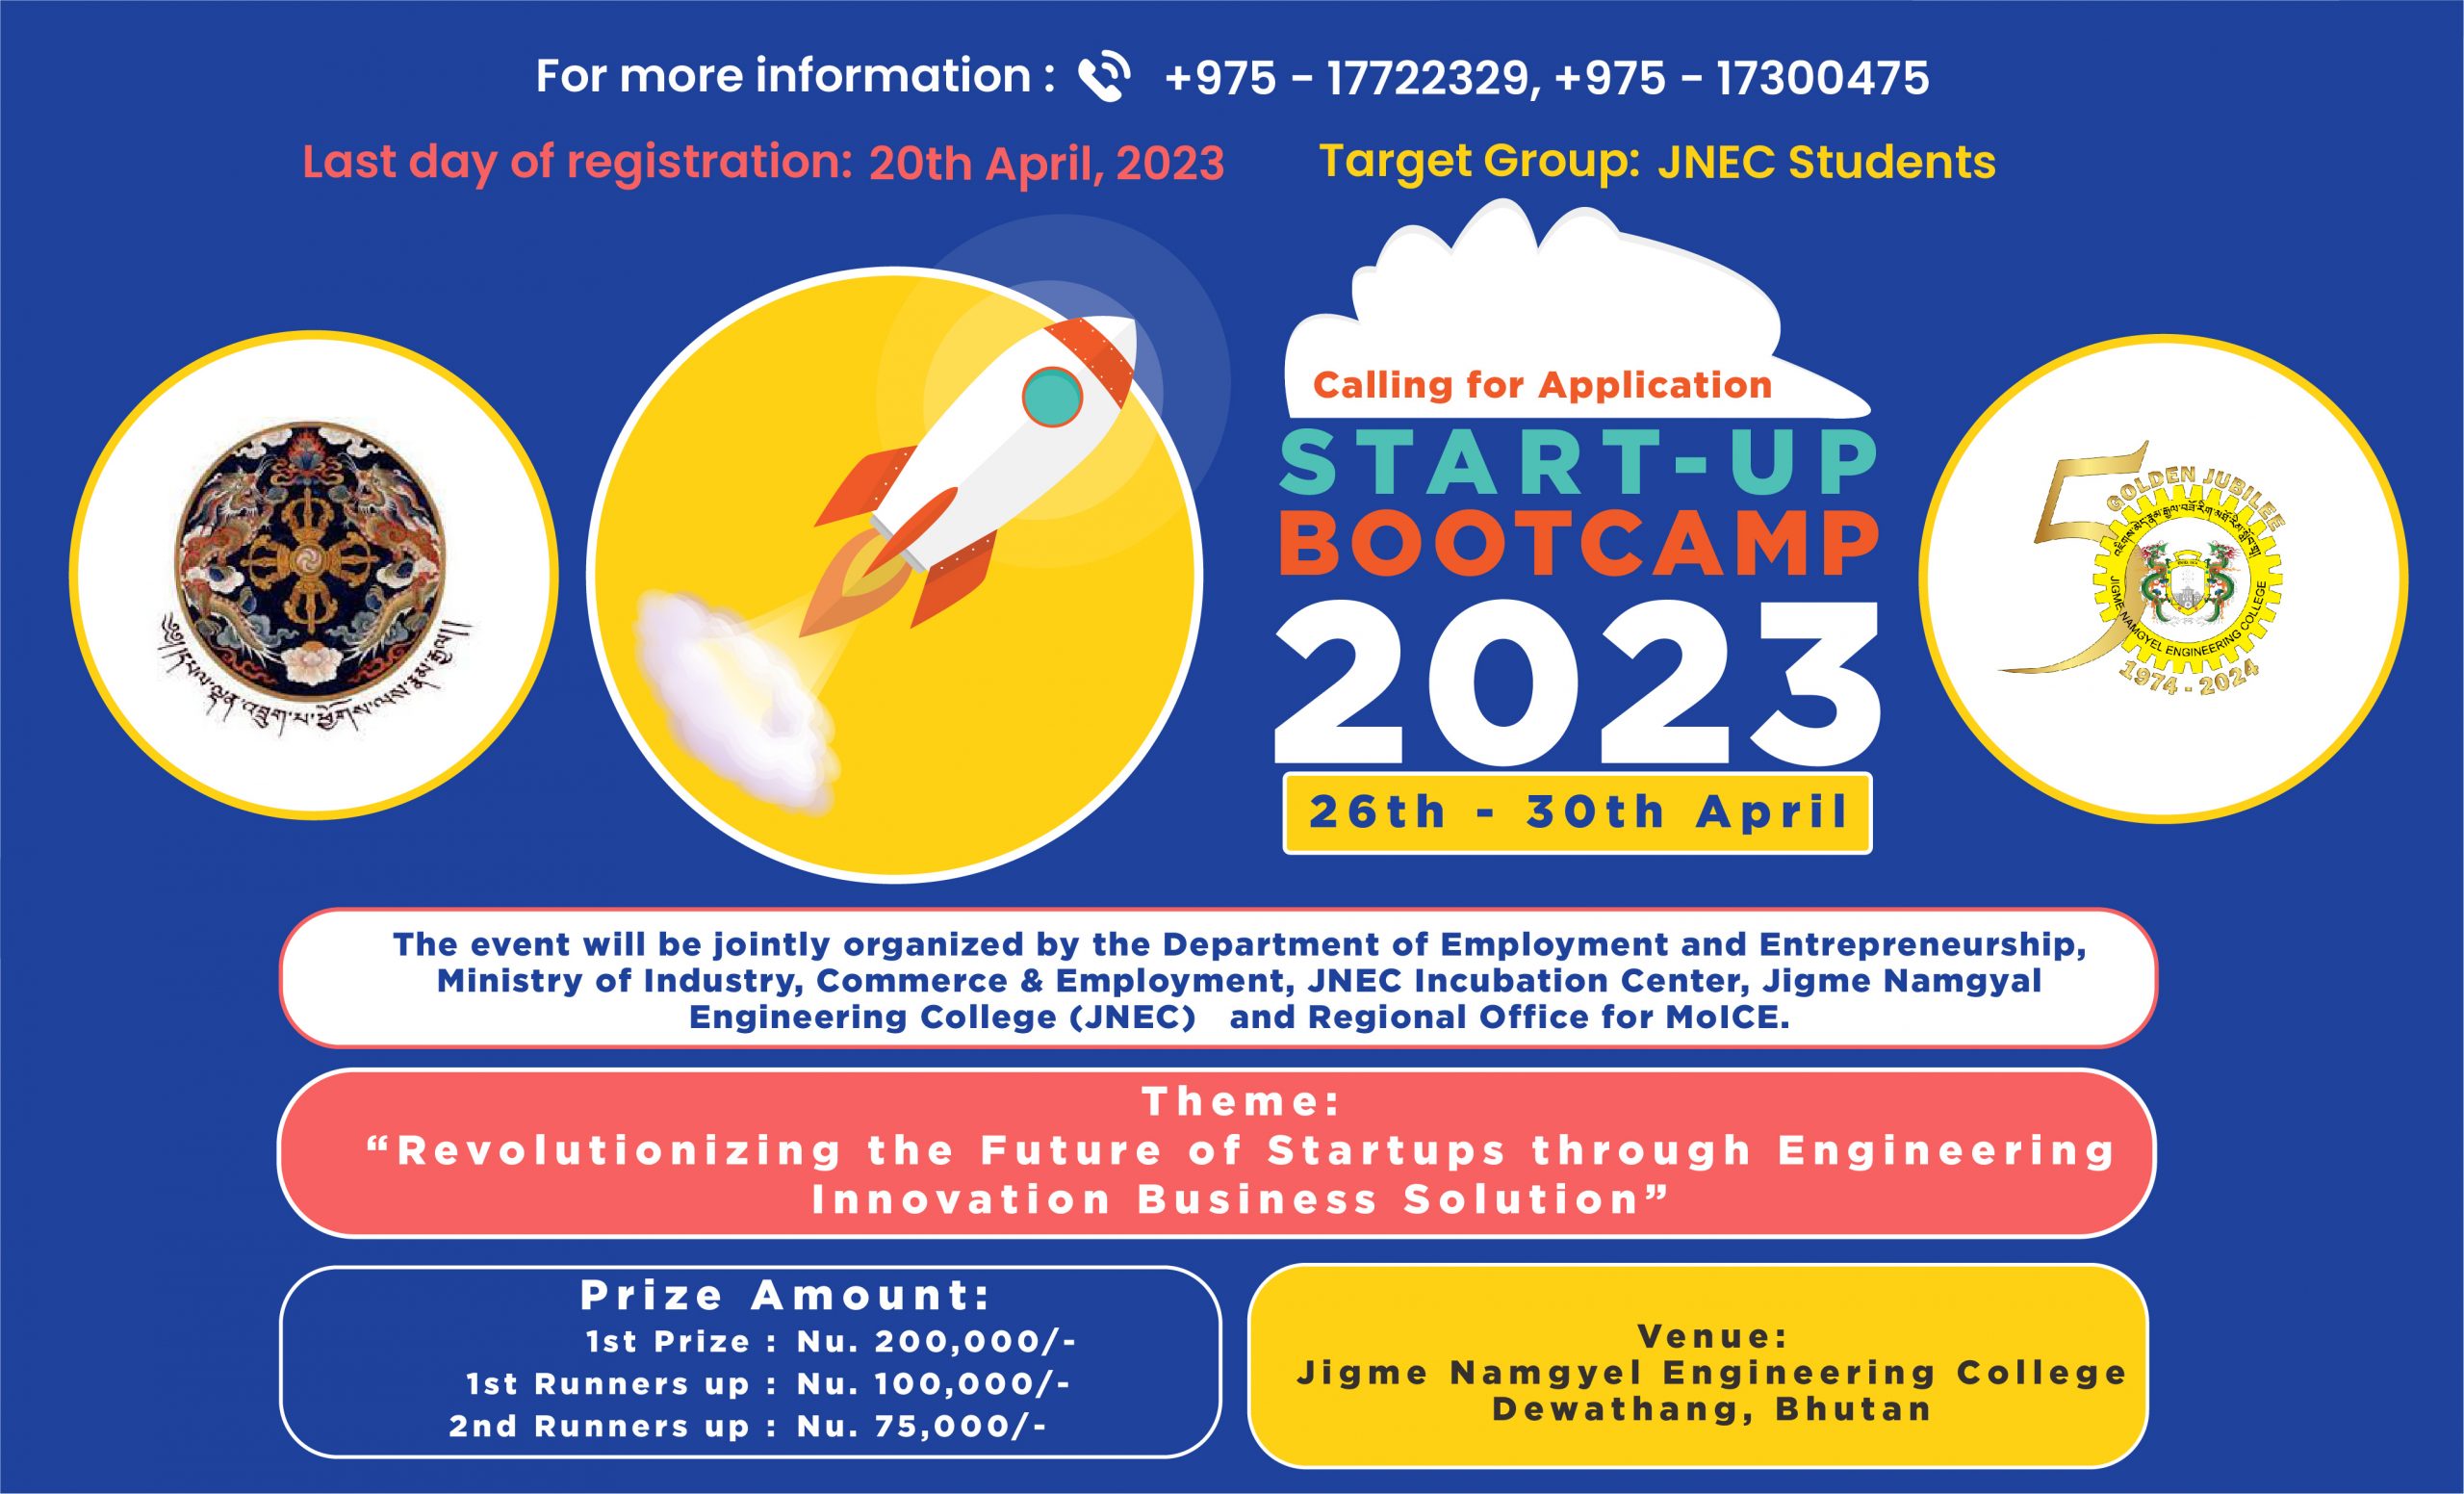 Calling for Applicants for Startup Bootcamp 2023